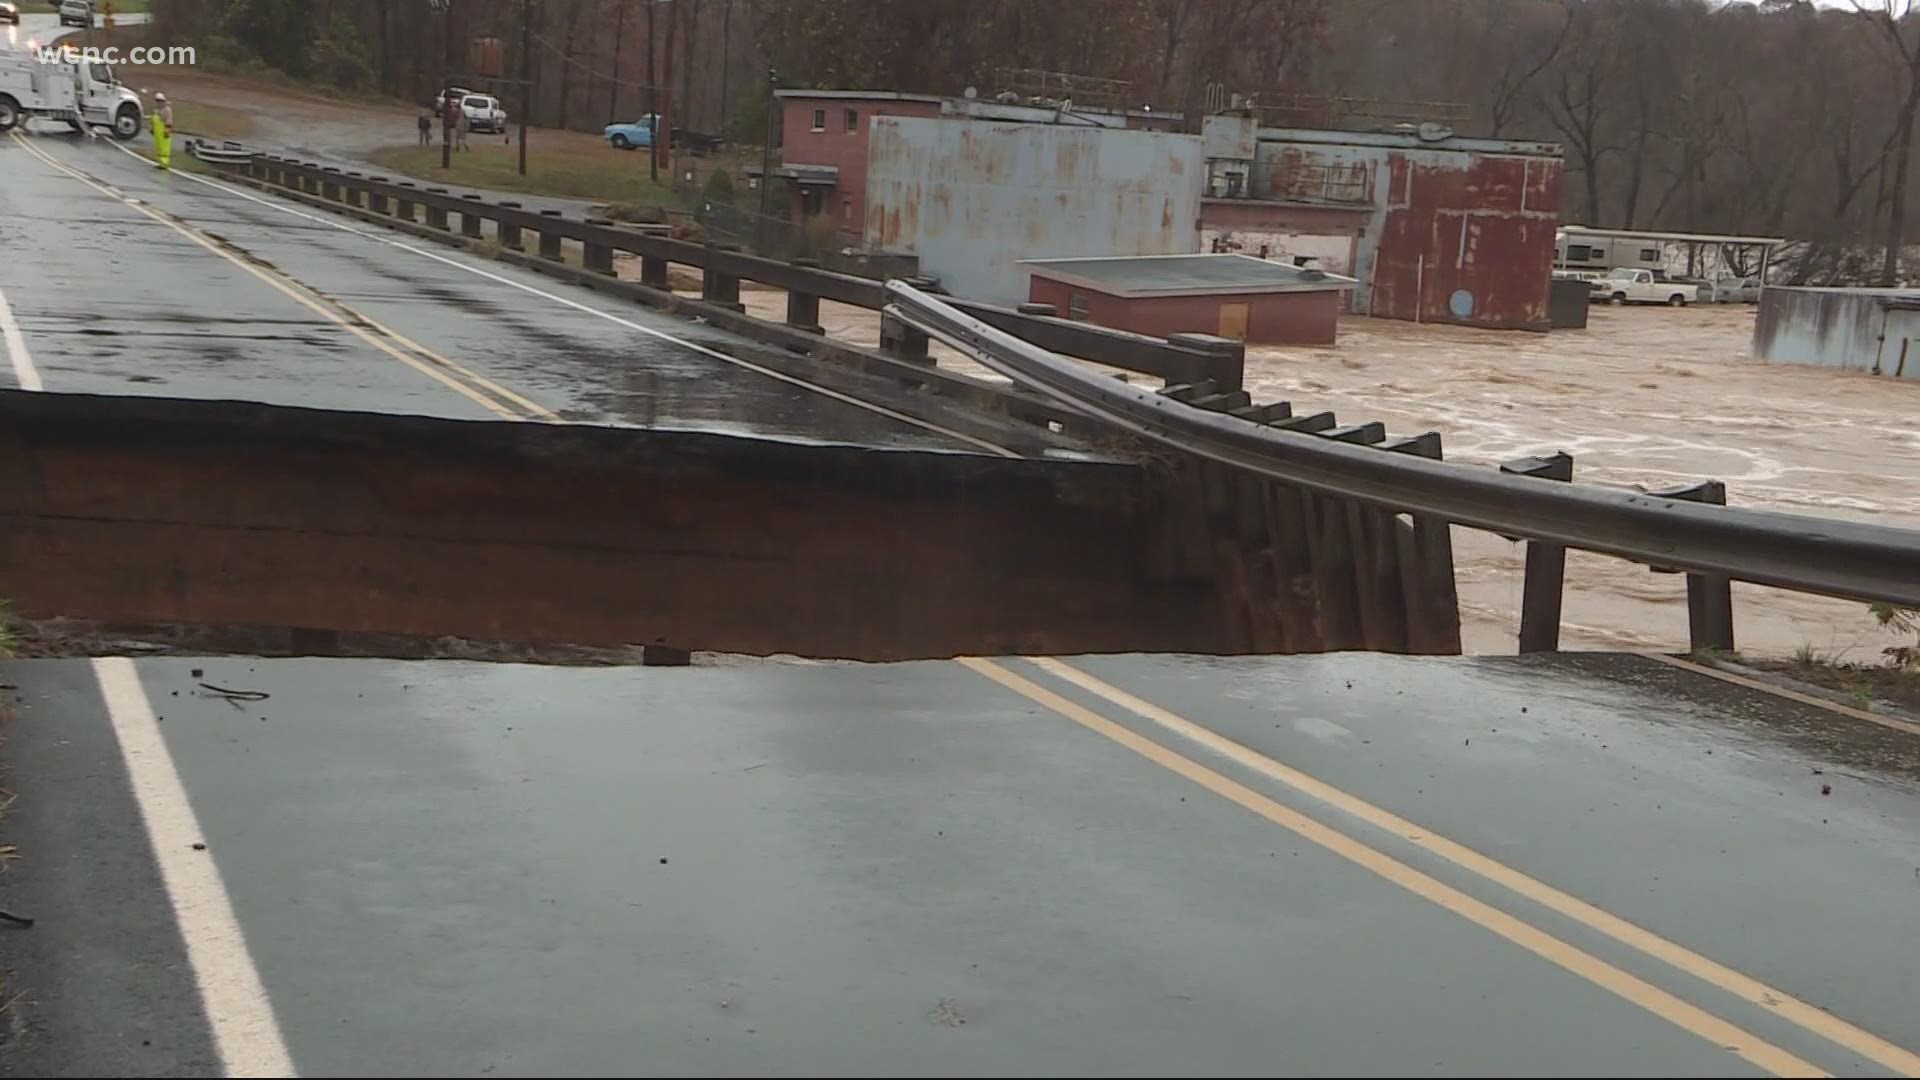 Many roads were washed away after the record breaking rain totals.